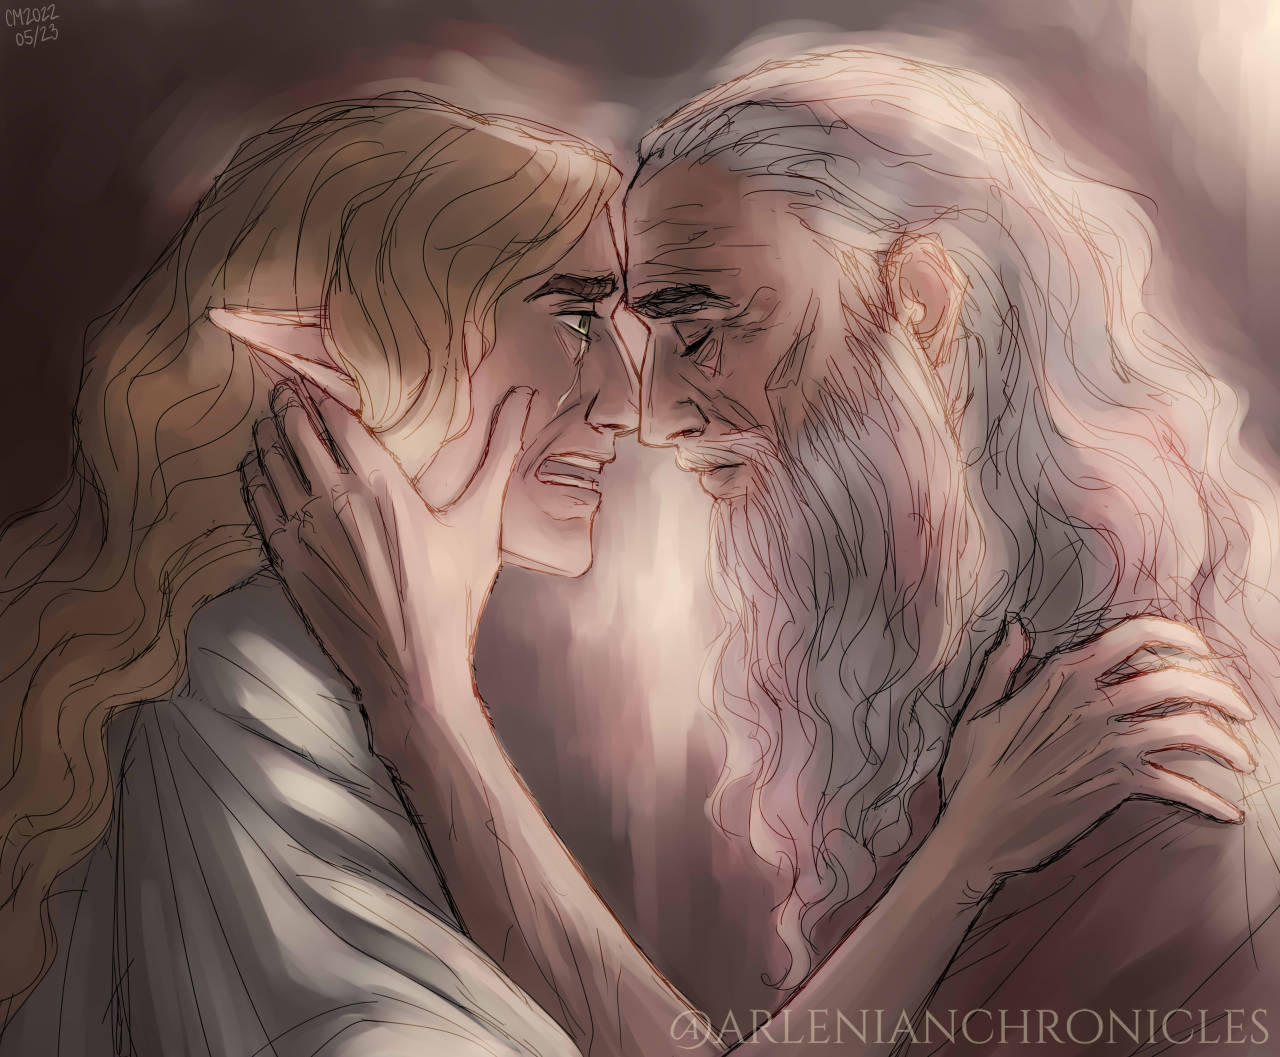 Drawing these two again after what feels like forever! The concept here is that Finrod is in denial about Bëor dying (and it’d be an even bigger punch to the gut since   Bëor   is the first mortal friend that Finrod will see die) T_T #i used what i learned from my farseer fanart for the lighting hehehh  #also one of my old eldritch comic drafts was about this concept too  #i just really like this concept loll ^^;; #art#my art#tolkien#silmarillion#fanart#elves#eldar#noldor#edain #house of beor  #house of finarfin #finrod#findarato#beor#balan#platonic love#friendship#family #honestly tho im kinda on the fence on whether i ship them or not  #cuz im more of a canon person and finrods already with amarie right  #and i tend to lean more into friendships and familial love  #plus atm im really into the idea that beor takes on a paternal vibe with finrod  #especially as he grows older and looks more like a granddad loll  #beor: no son dont eat that moss im warning ya